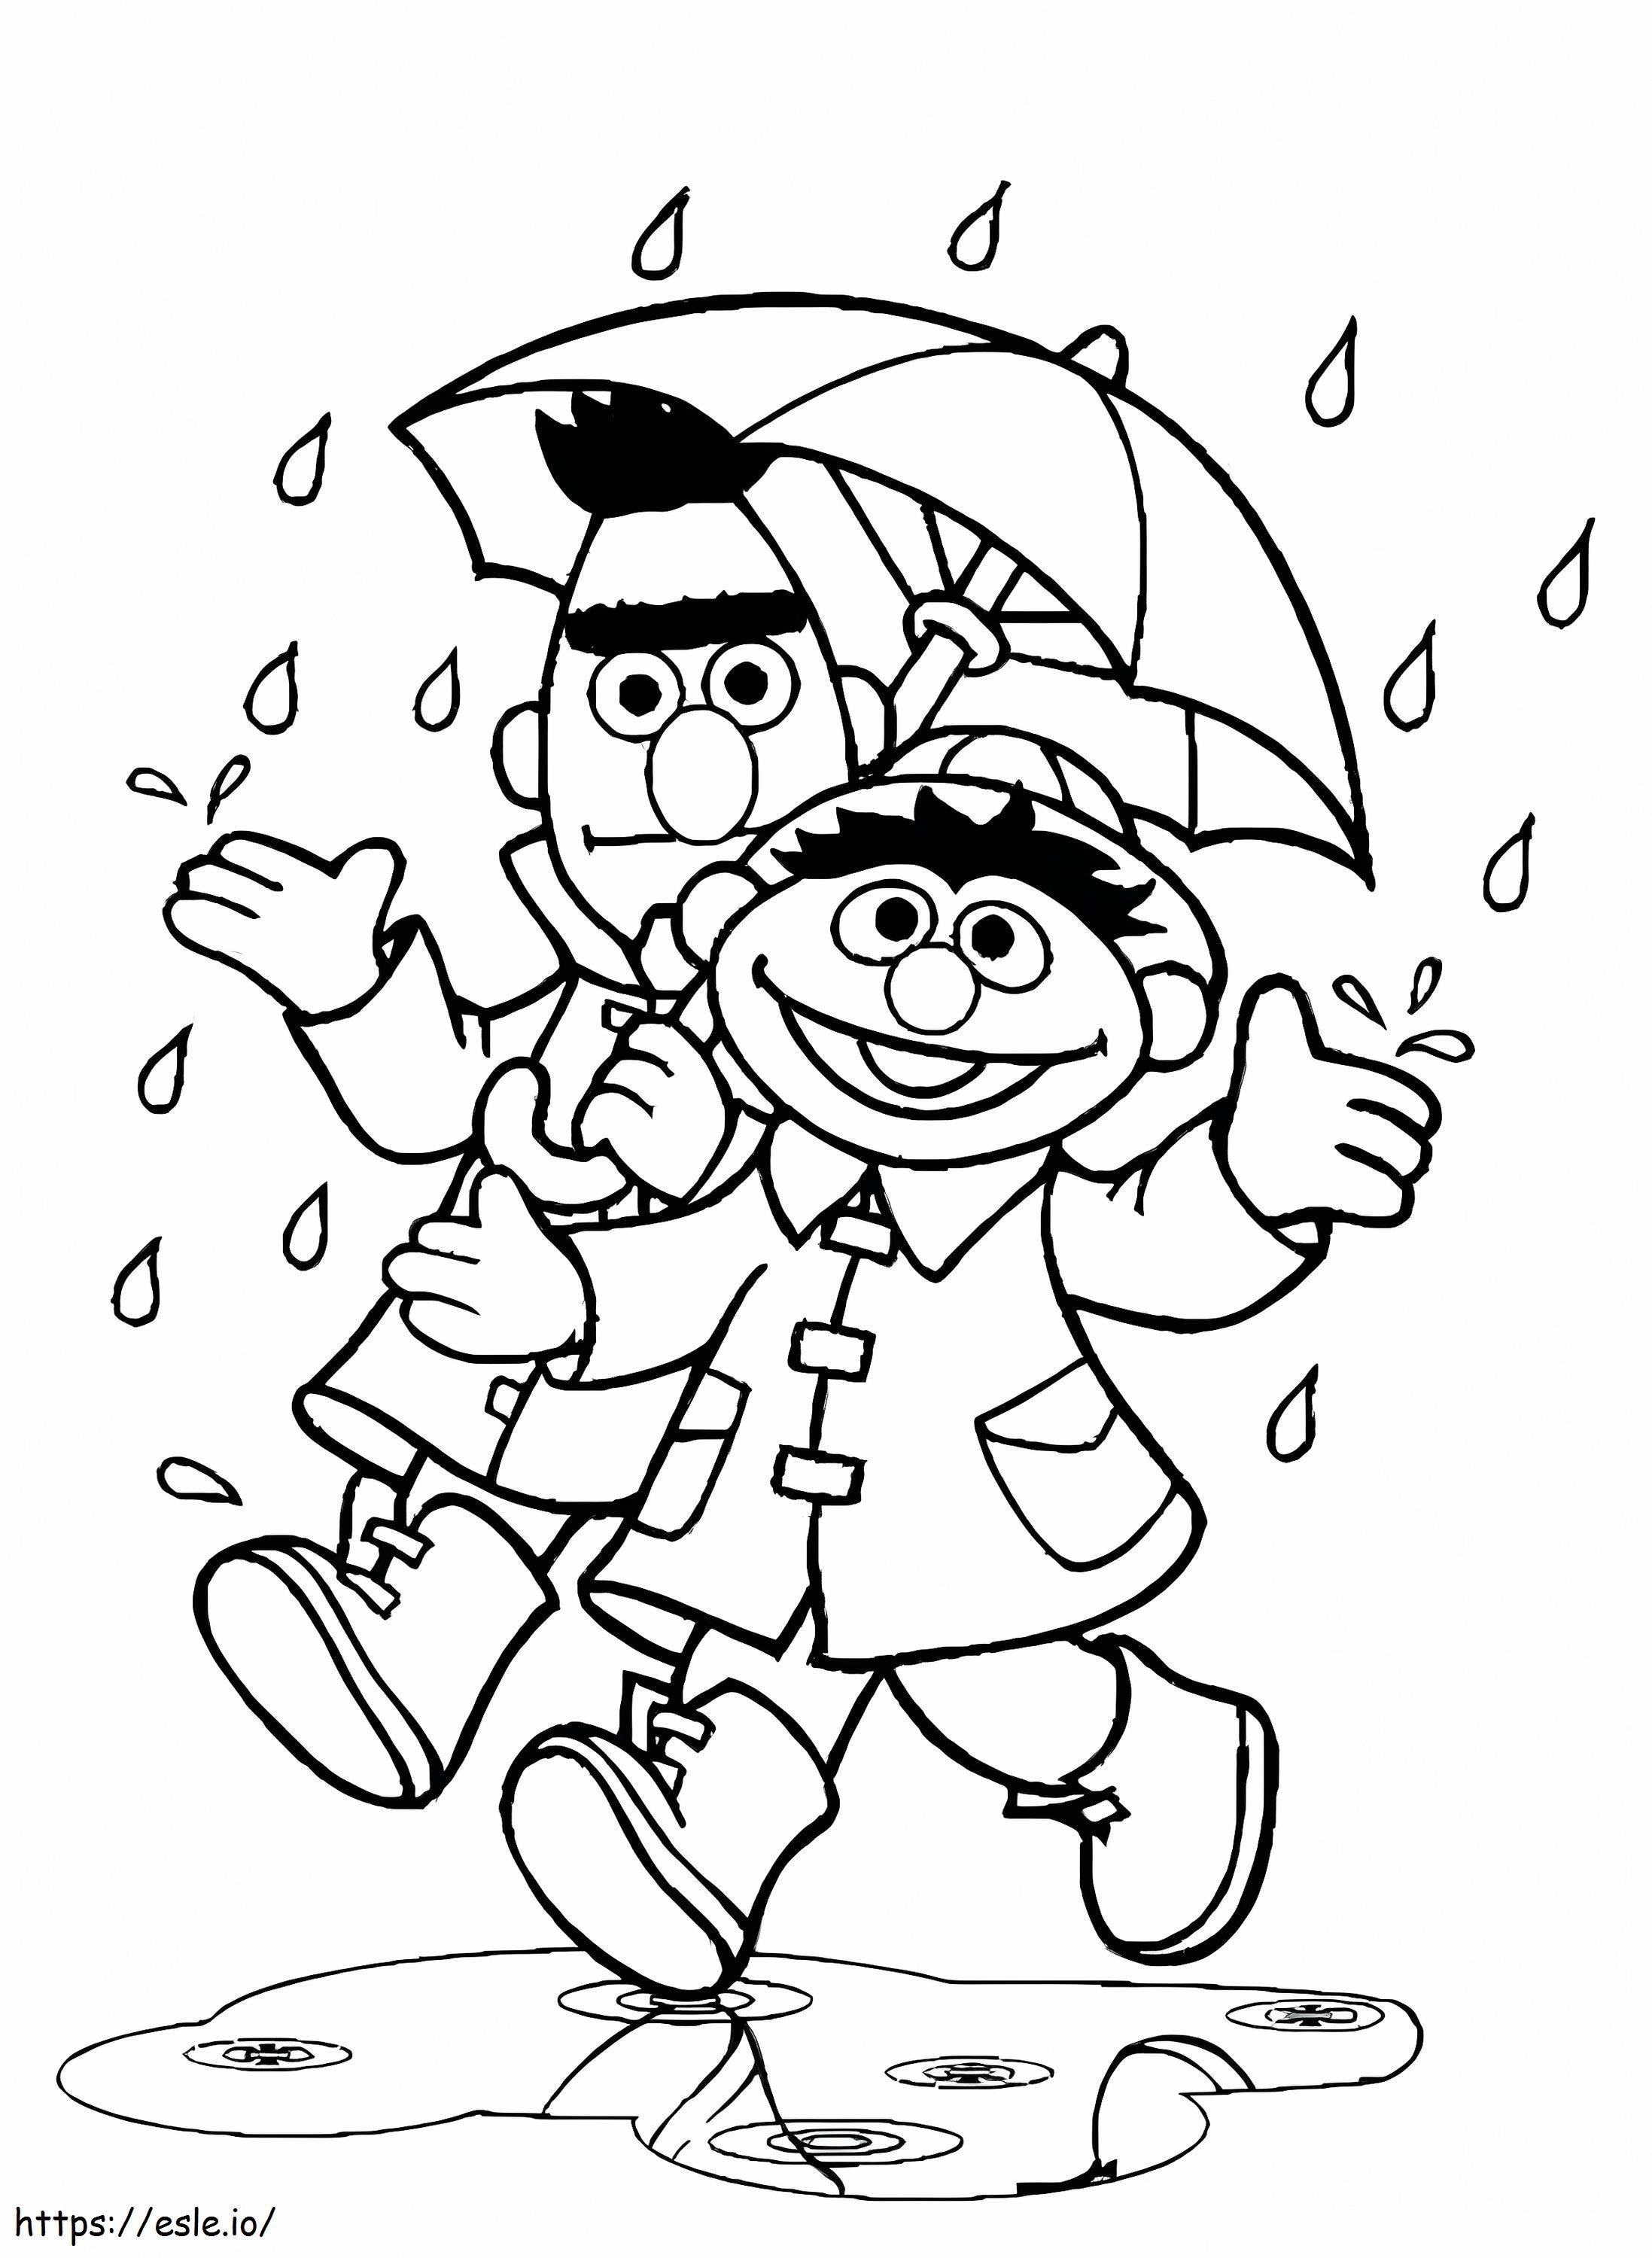 Bert And Ernie Rain coloring page